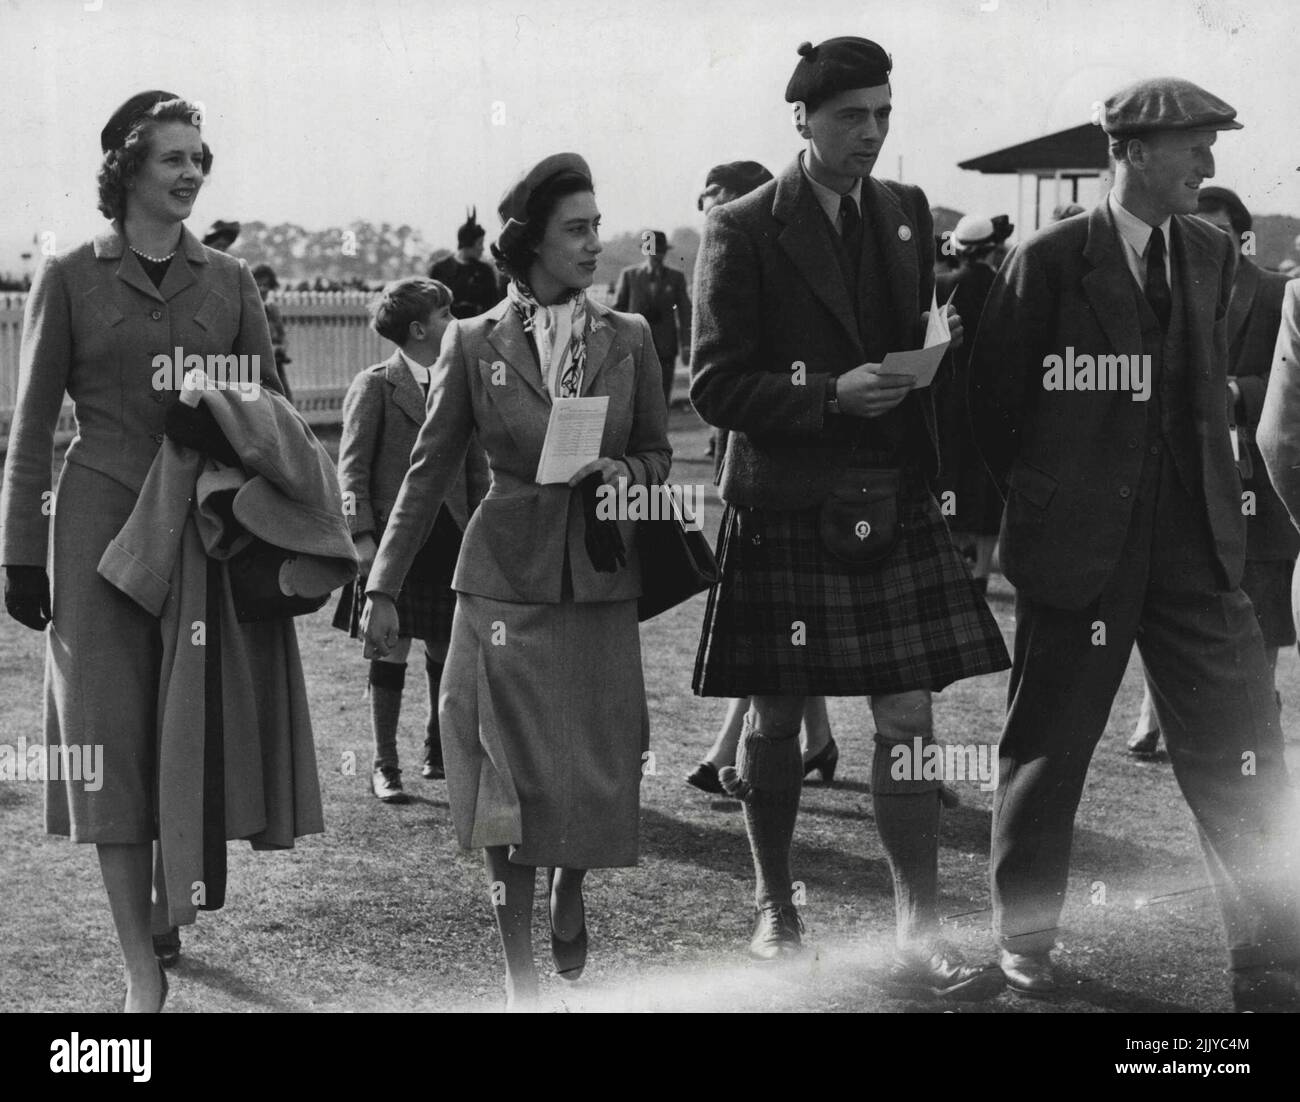 Two escorts for Princess ***** At Scottish Race Meeting With Princess Margaret at the Hunt races in Scotland yesterday were kilted Lord Ogilvy. son and ***** of the Earl of Airlie, and (wearing cap) the Earl of Dalkeith, heir to the Duke of Buccleuch. The Princess wore a dusty-pink lightweight suit and a silk hand-painted scarf. September 20, 1950. (Photo by Paul Popper Ltd). Stock Photo